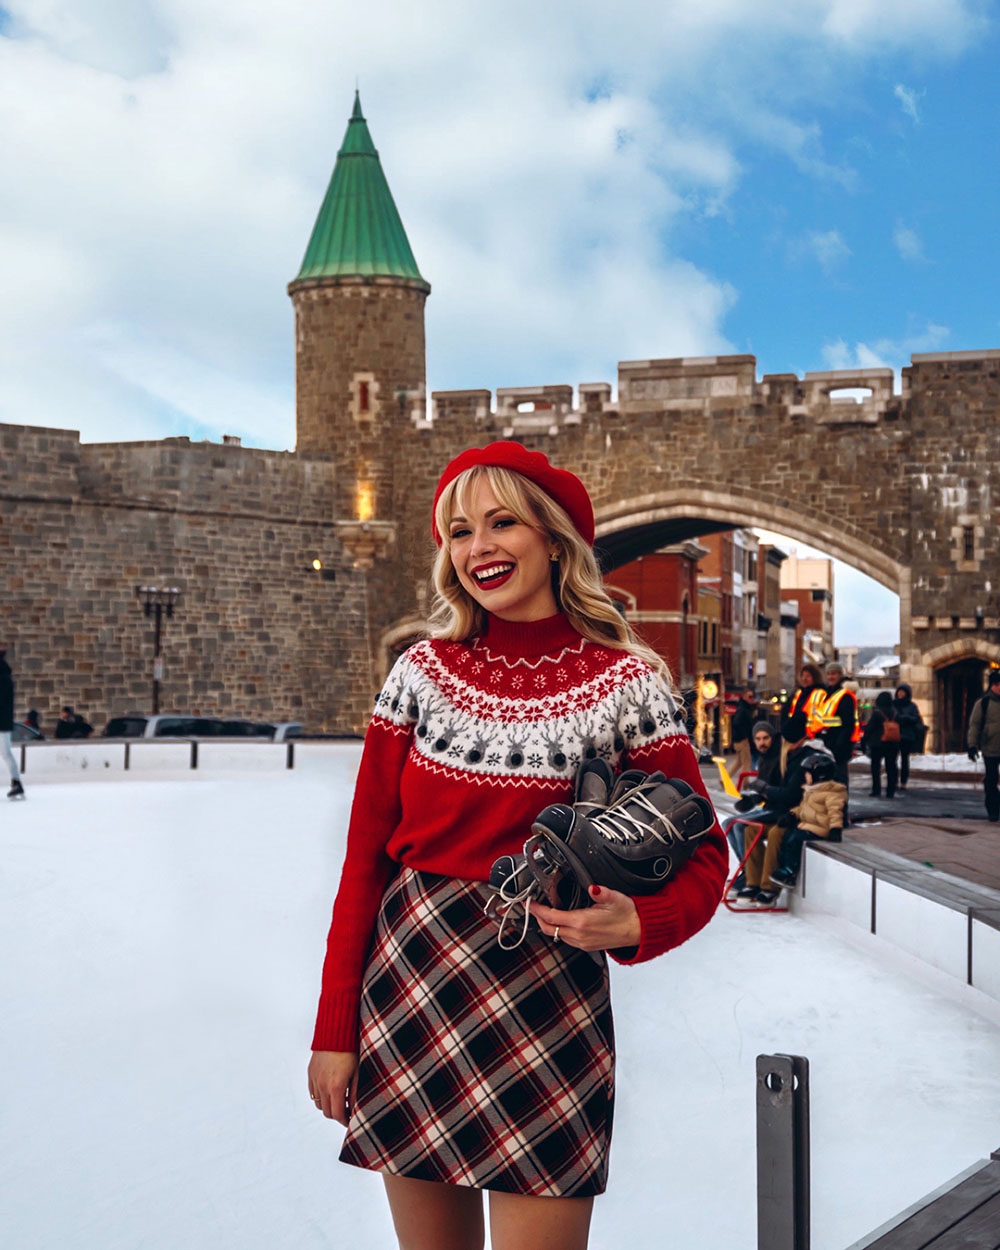 Quebec City at Christmas time is absolutely magical. In fact, it’s pretty safe to say it’s the most magical place to visit at Christmas time in all of Canada! If you’re planning a trip to Quebec City this winter you won’t want to miss this guide to the best things to do in Quebec City at Christmas time. This guide features everything from the top Quebec City activities and attractions, to the must see sights, best restaurants, festive events, and everything in between. Pictured here: Skating at Place d'Youville